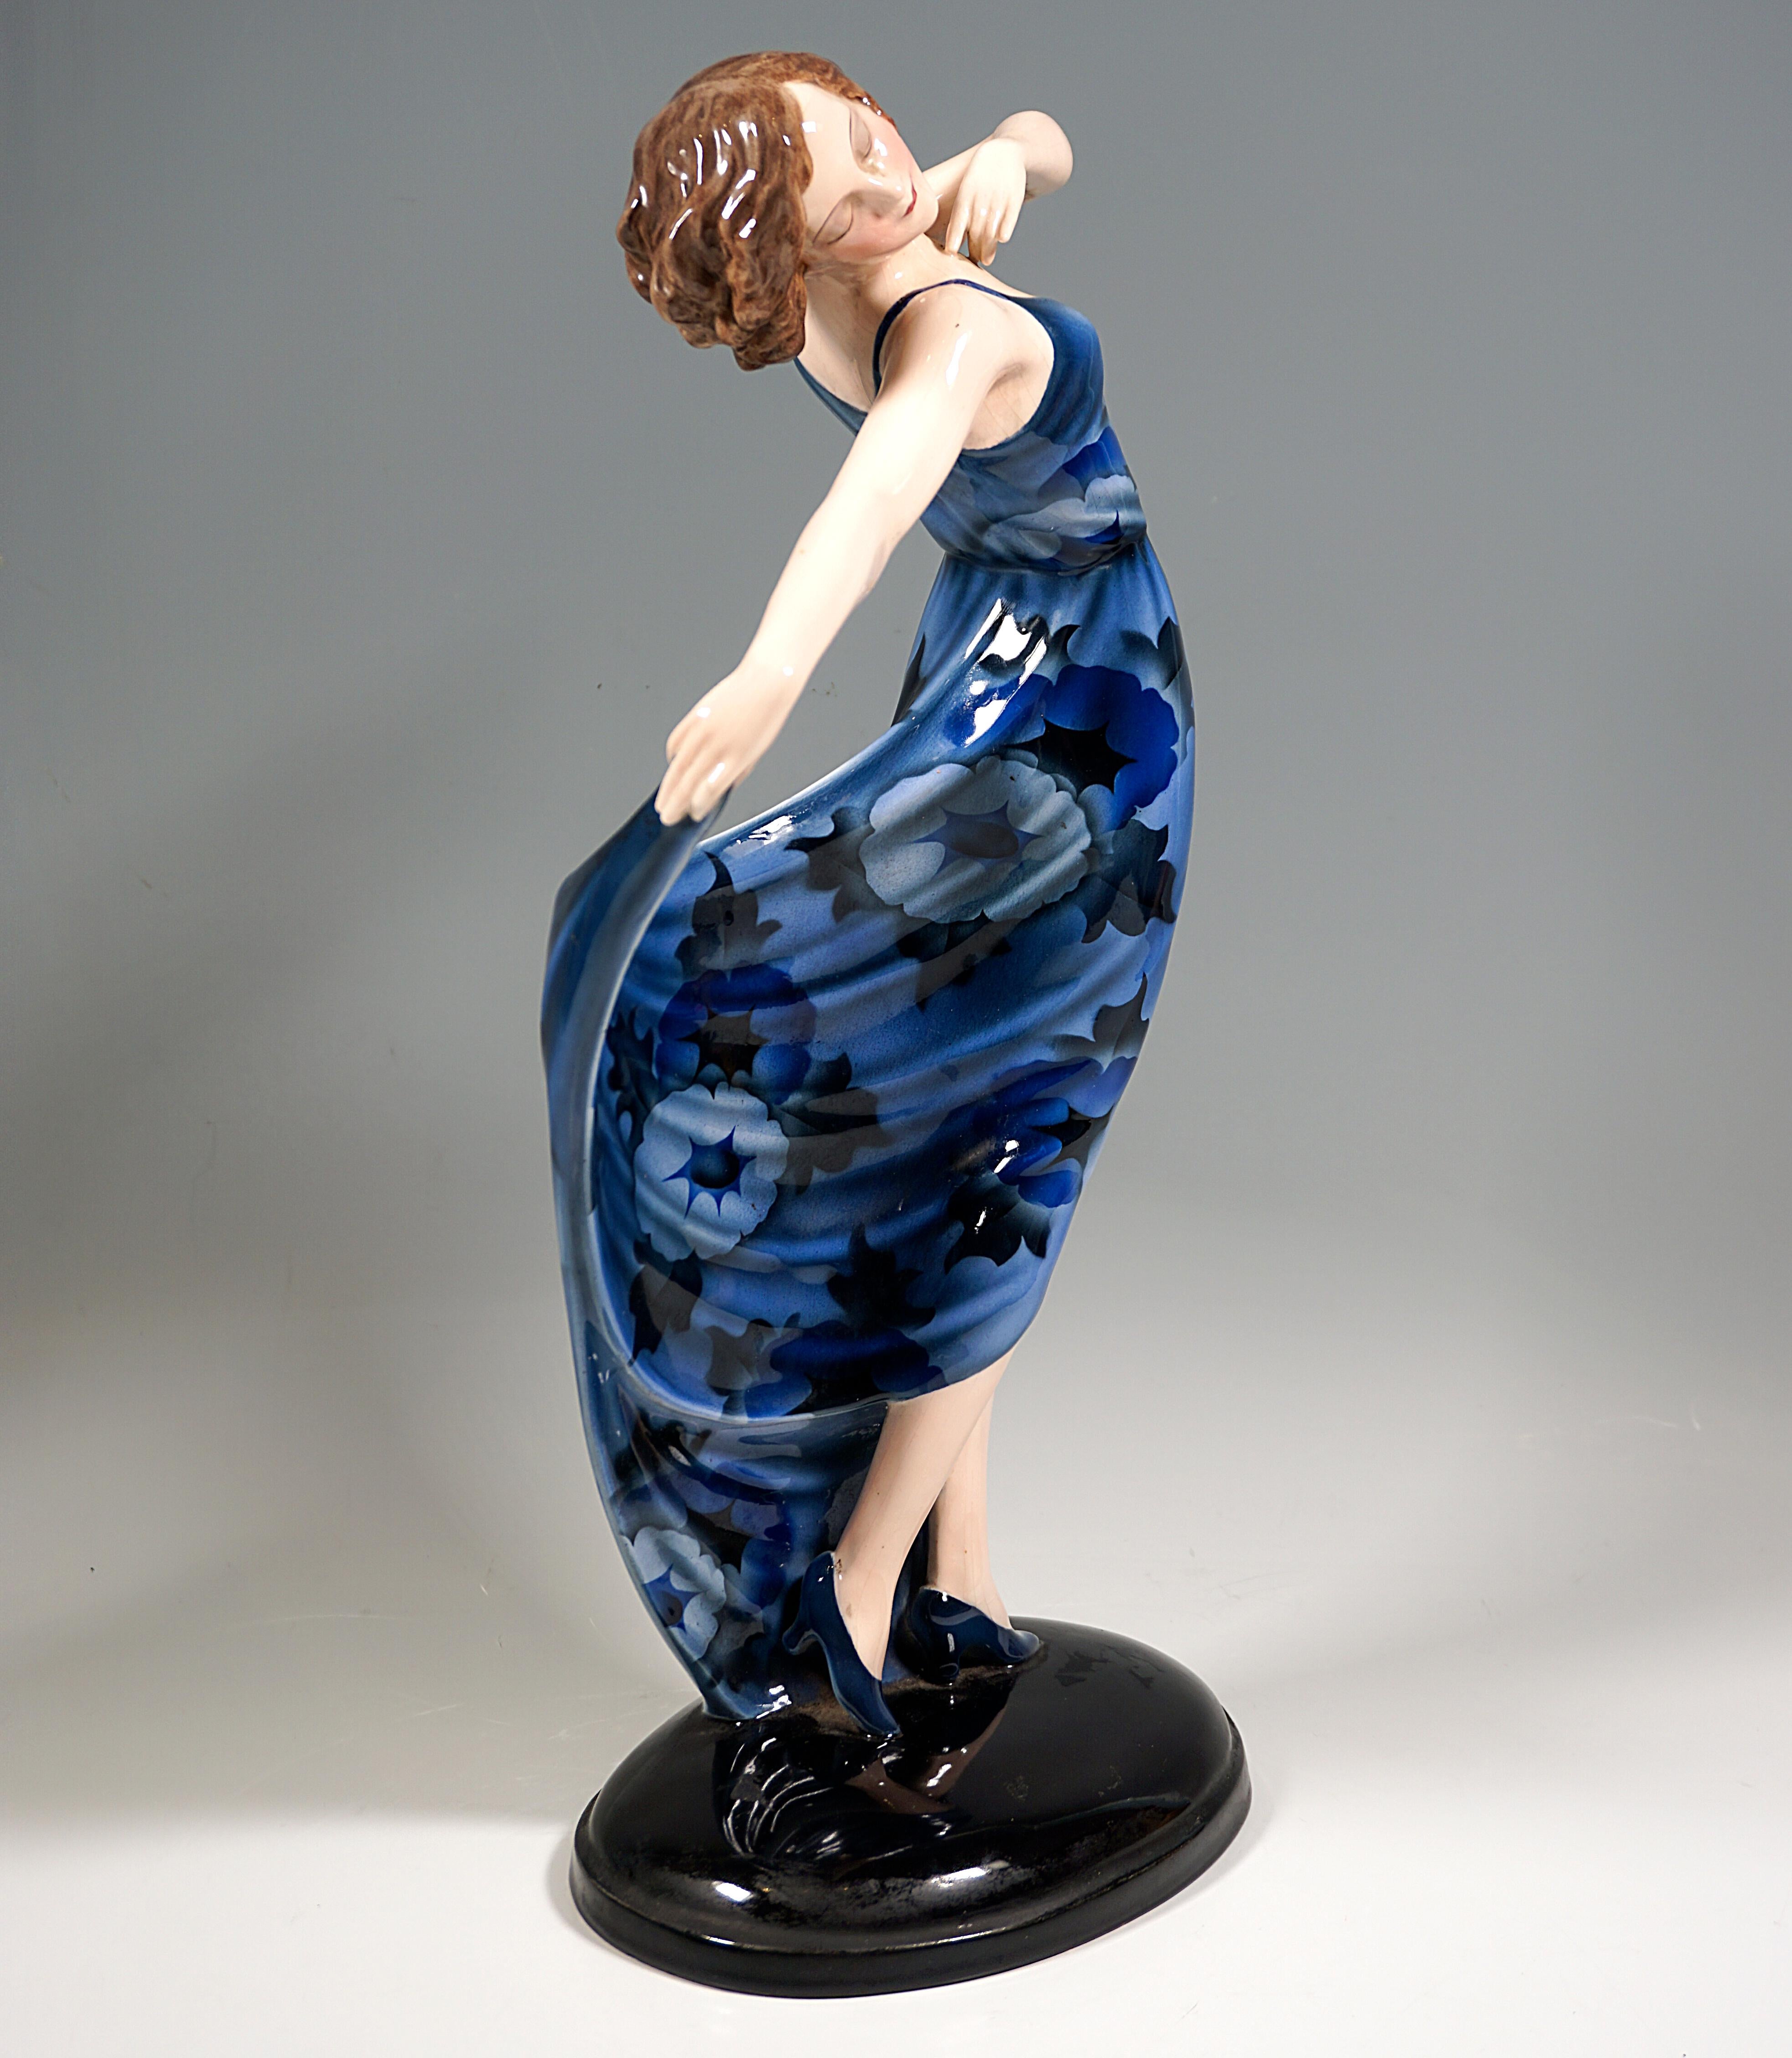 Elegant Goldscheider Art Deco Ceramic Figure Around 1930: 
Extremely rare model of a dancer with chin-length, brunette hair in a blue, long dance dress with abstract, floral decoration, posing with the upper body slightly turned to the side and